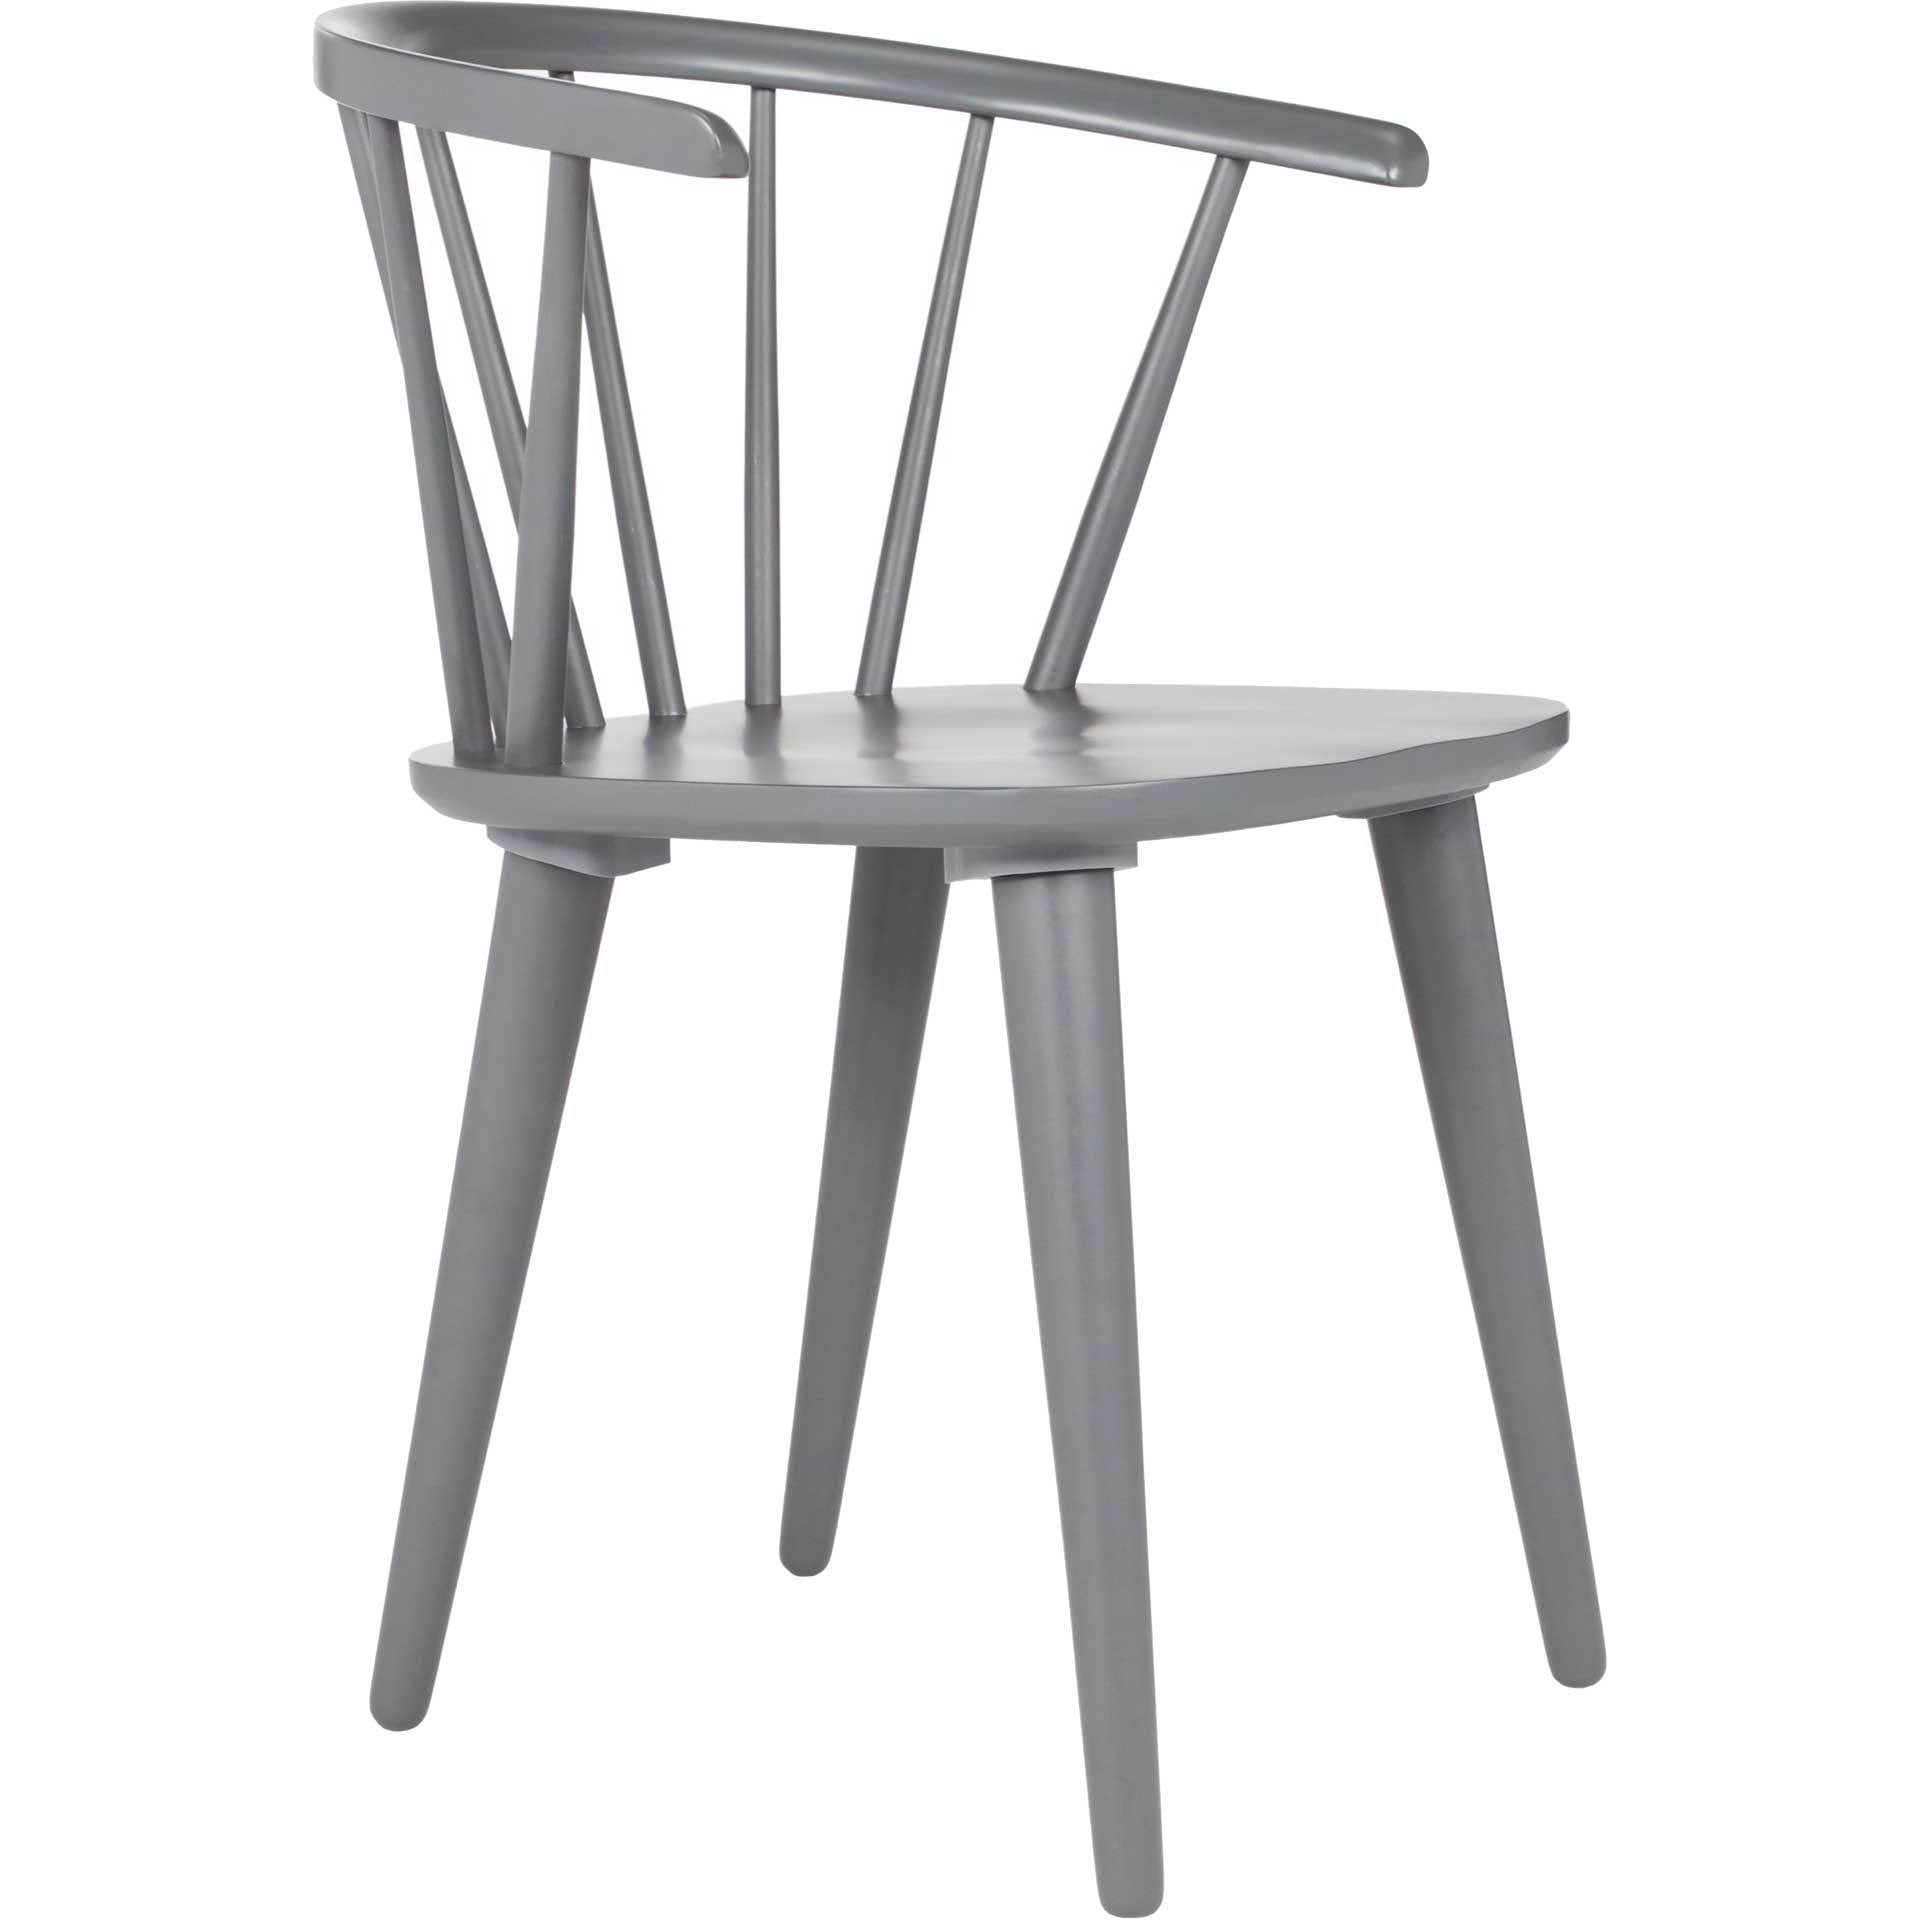 Blair Curved Spindle Side Chair Gray (Set of 2)